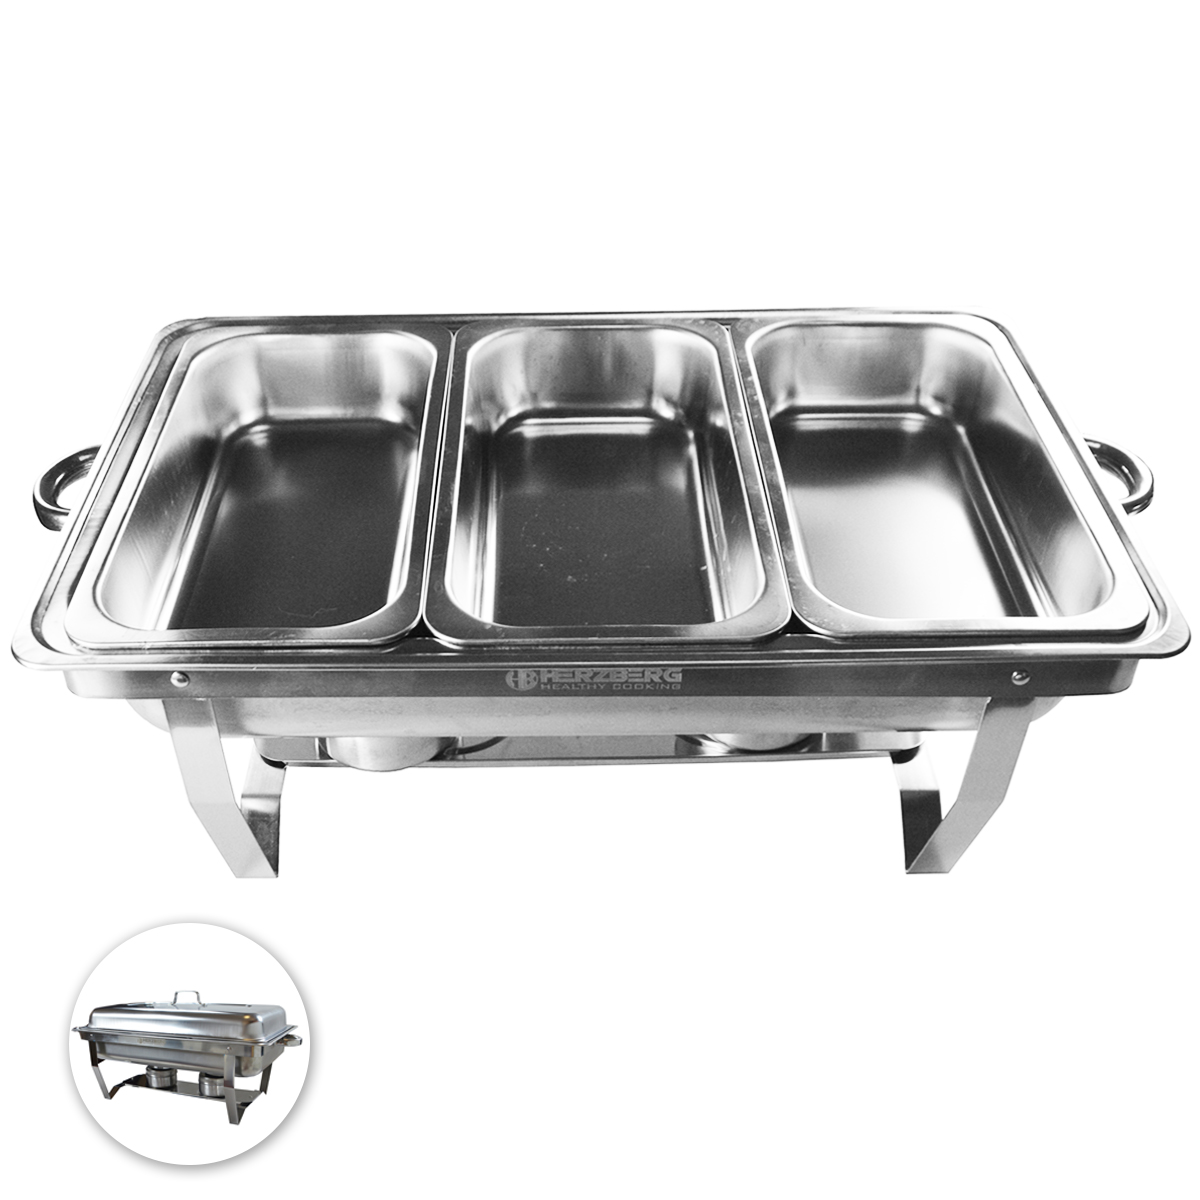 Herzberg HG-8022-3: Stainless Steel Chafing Dish - 3 Pieces 1/3rd Food Pan